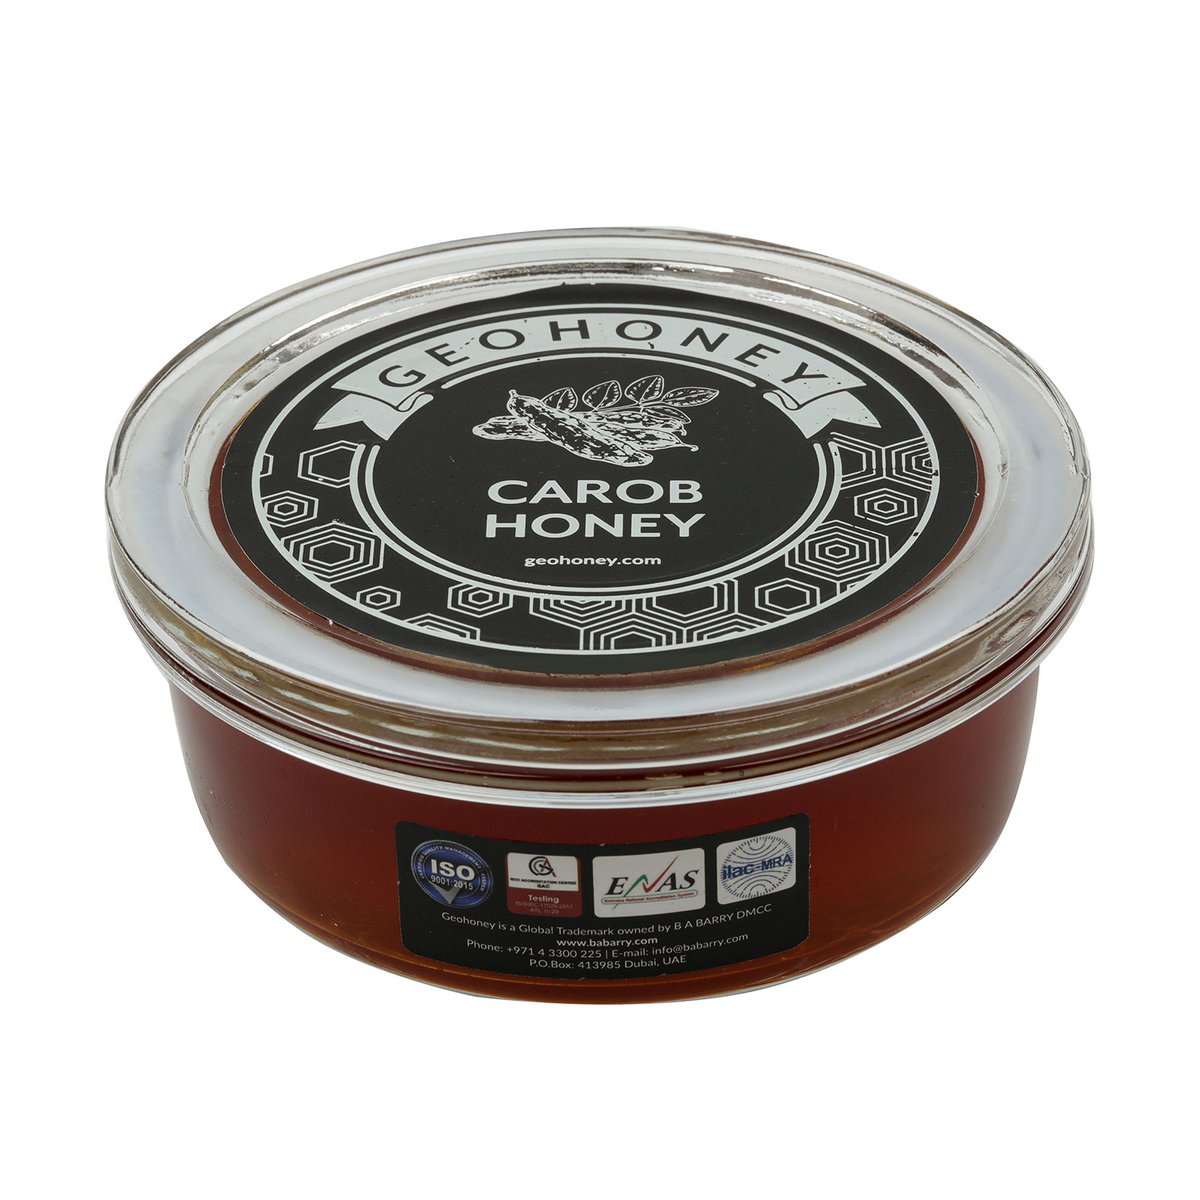 Carob Honey – 450gm | Geohoney 
https://t.co/ubEqvPbnee 
Taste the richness of pure &amp; organic raw Carob honey, harvested freshly from bee hives,  additives-free, class A++, amd finest quality  available here.

#geohoney #organichoney https://t.co/x1txyD5wRh